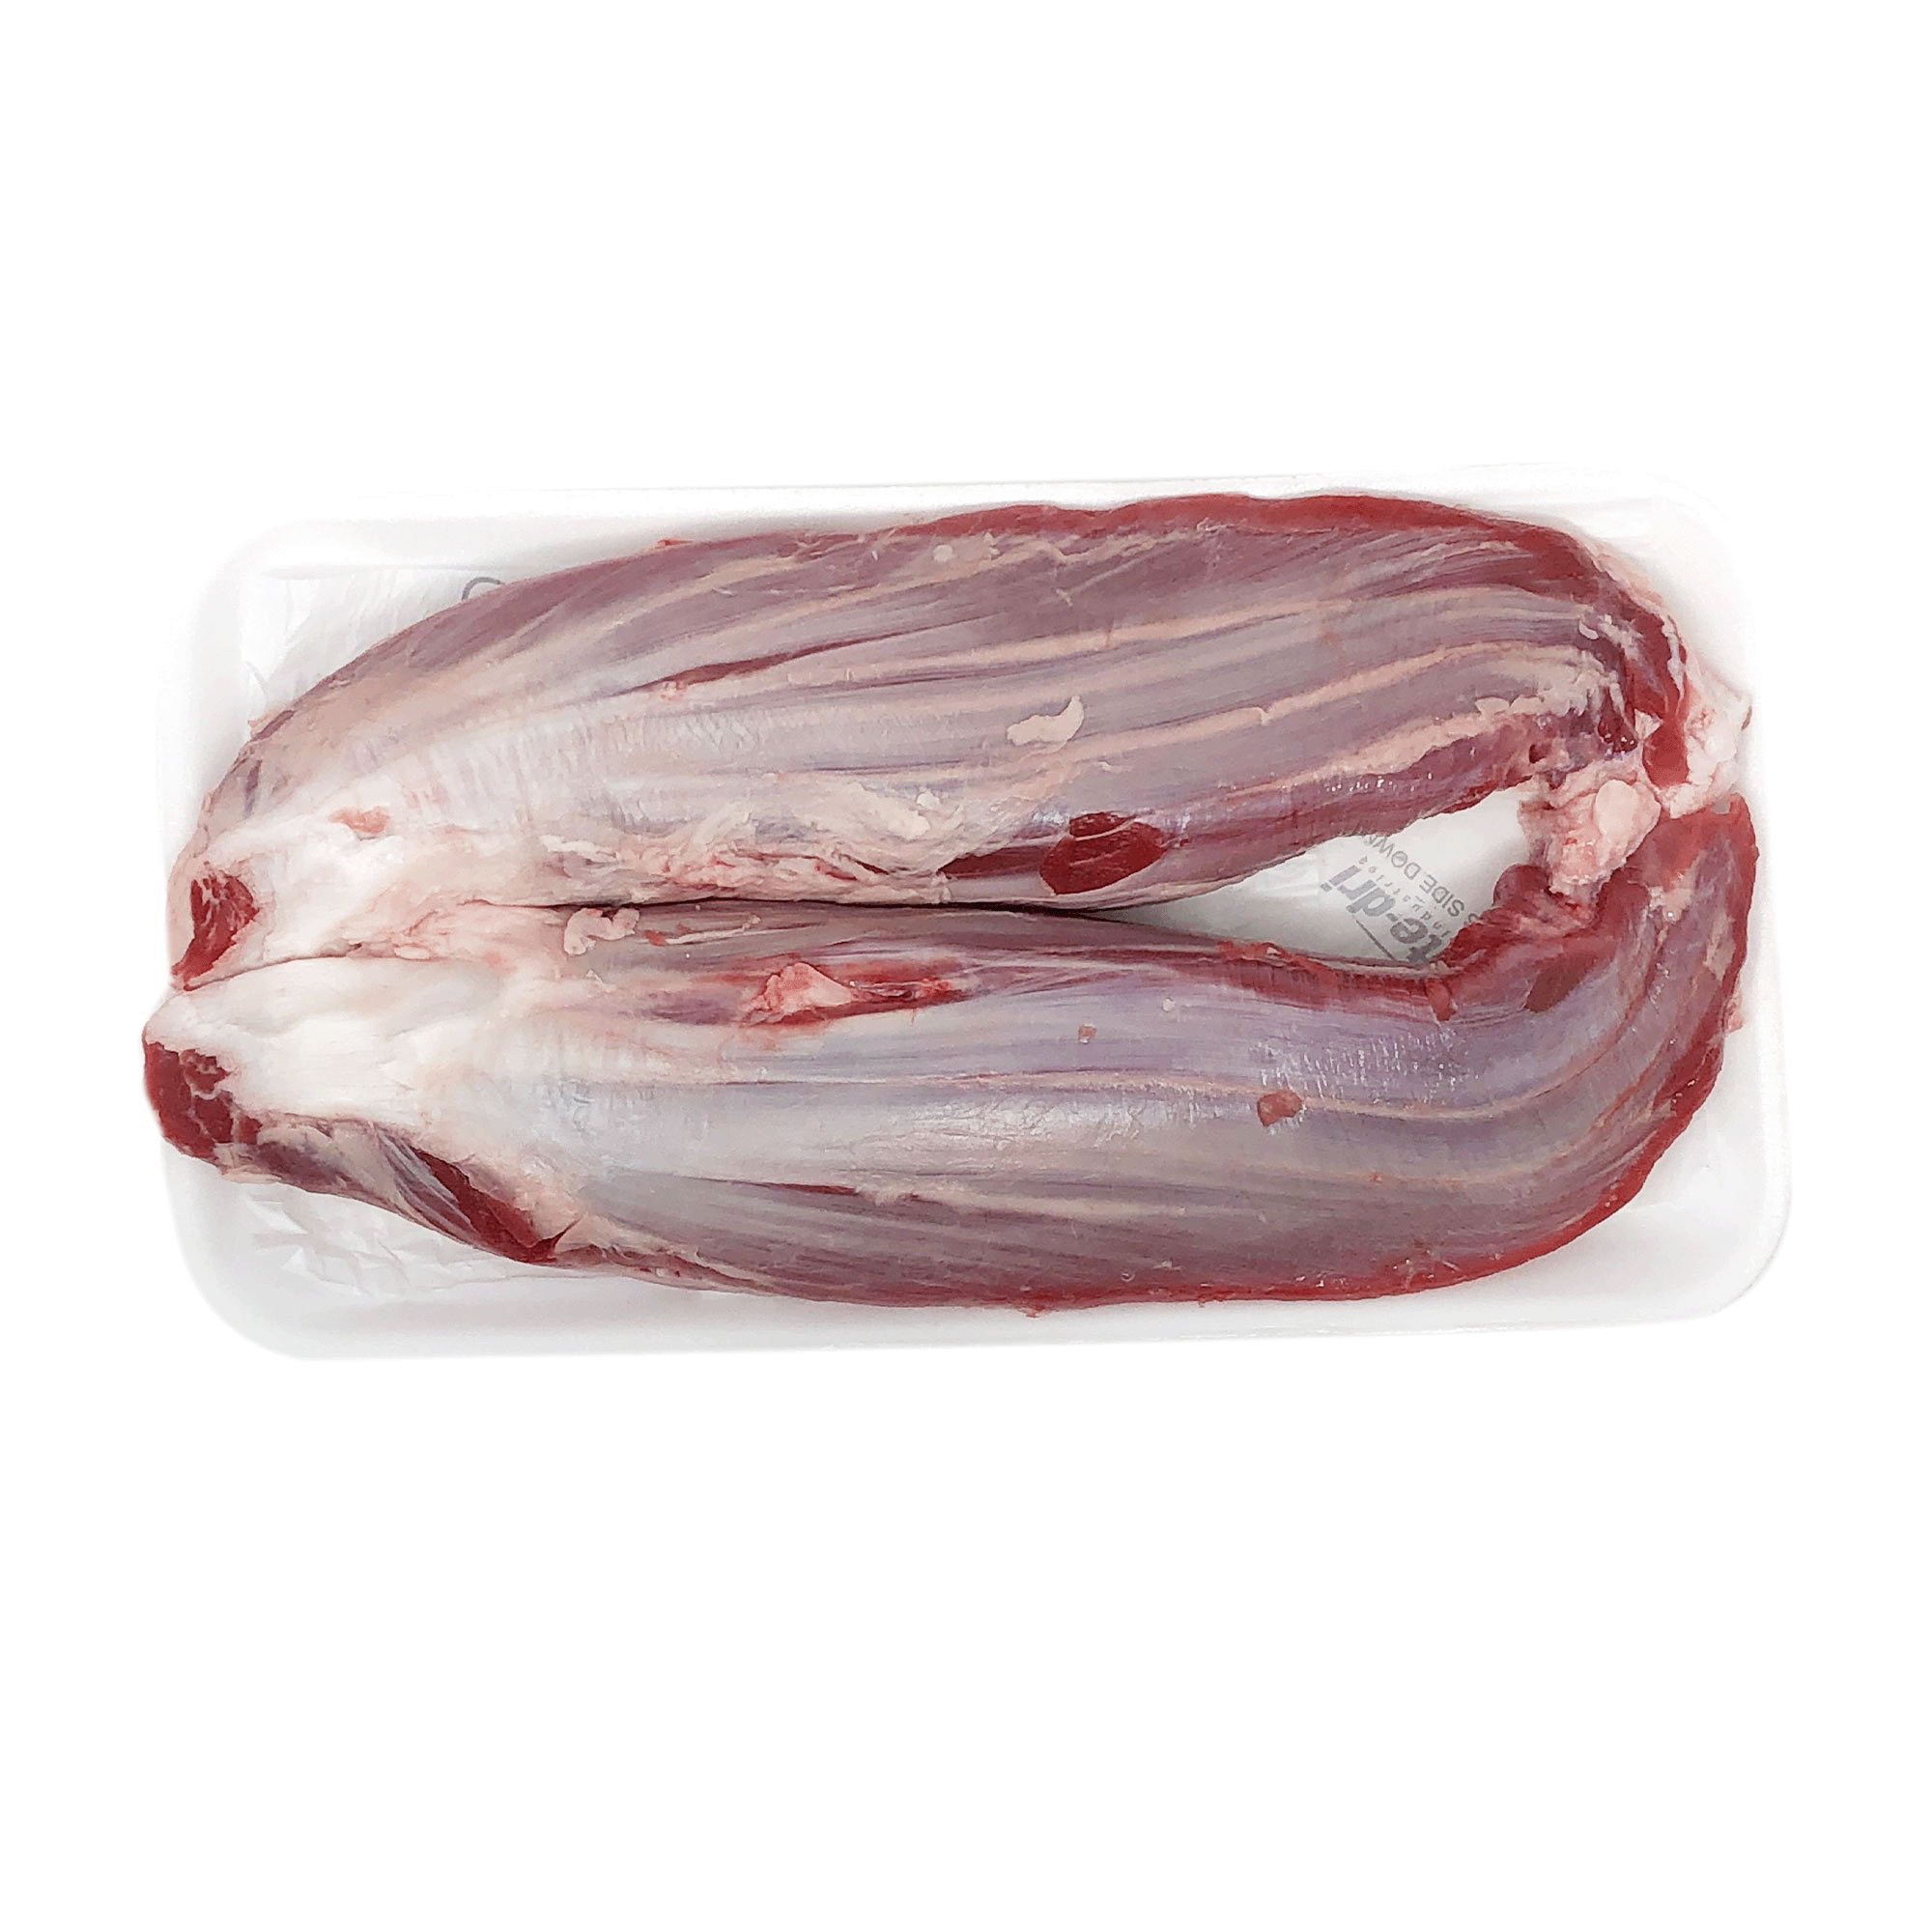 BEEF SHANK SMALL